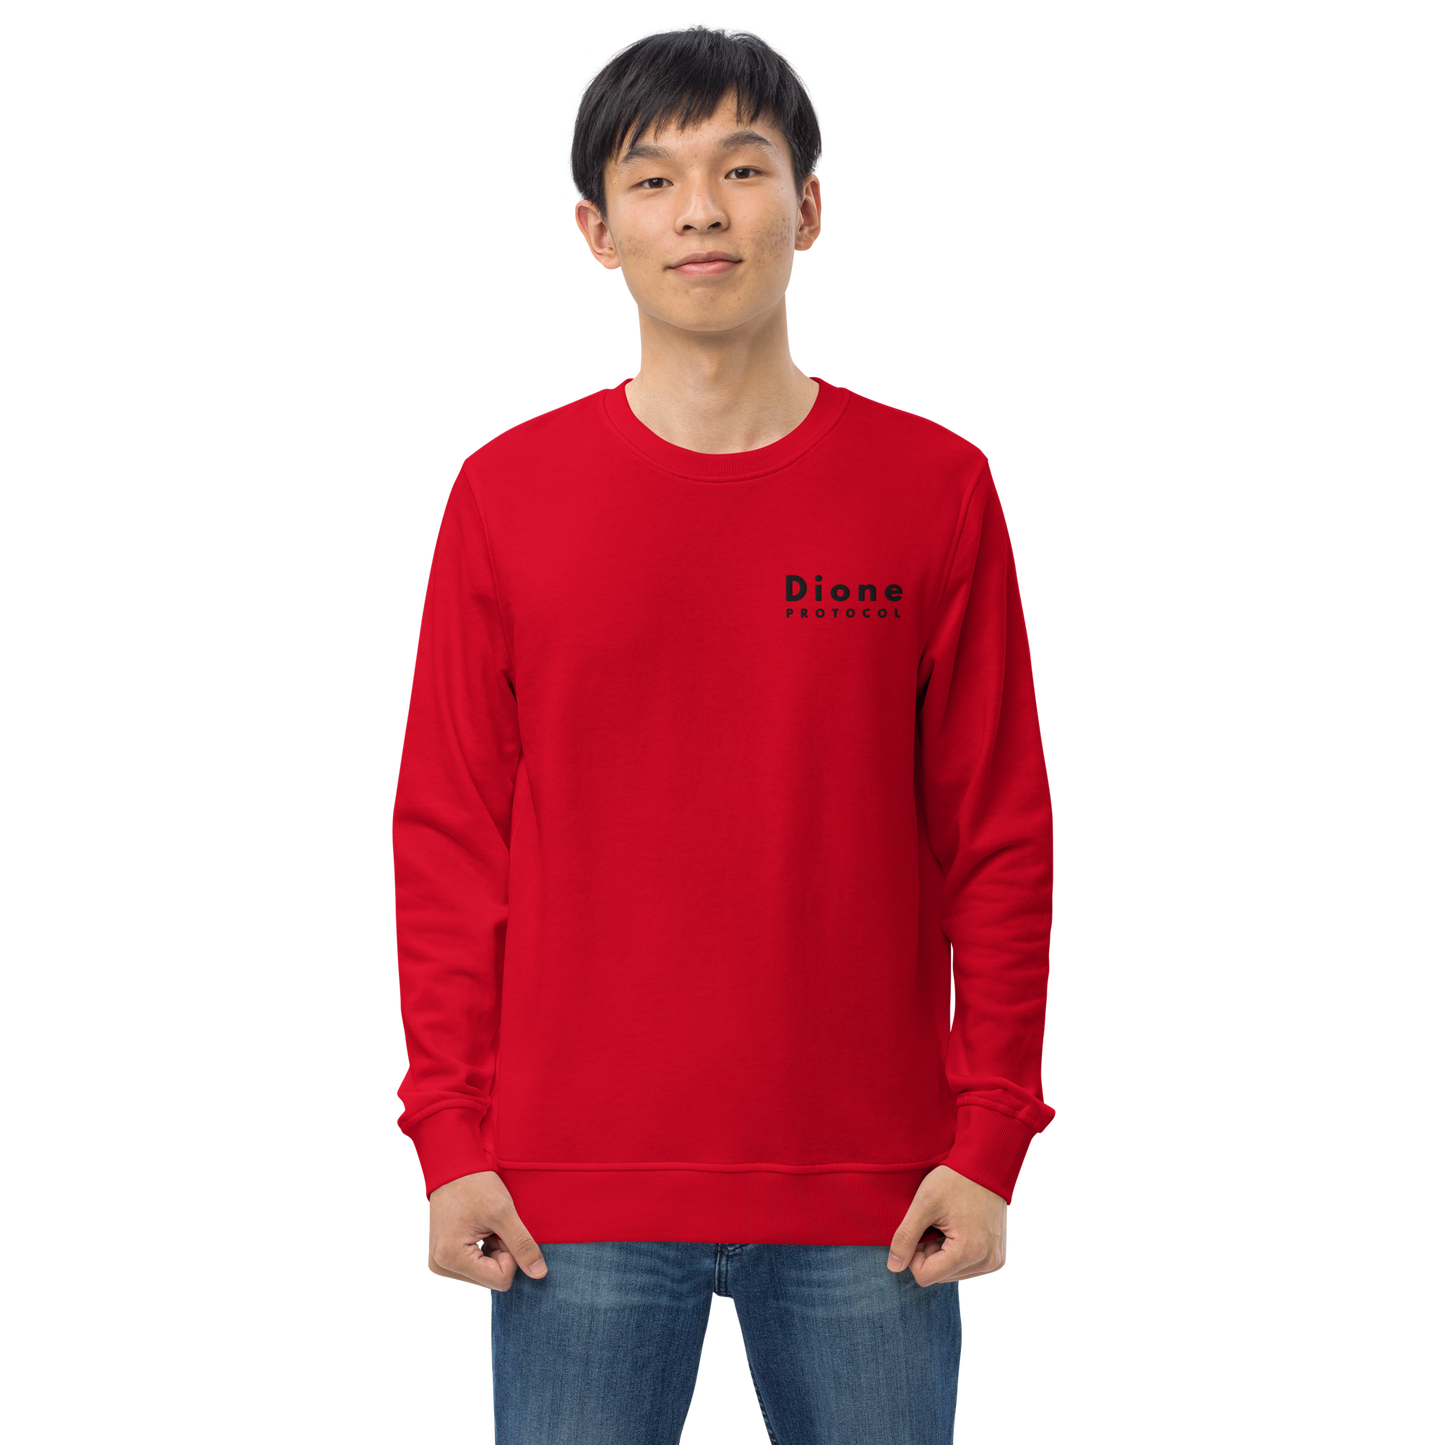 Sweat - Space V1.0 - Rouge - Standard